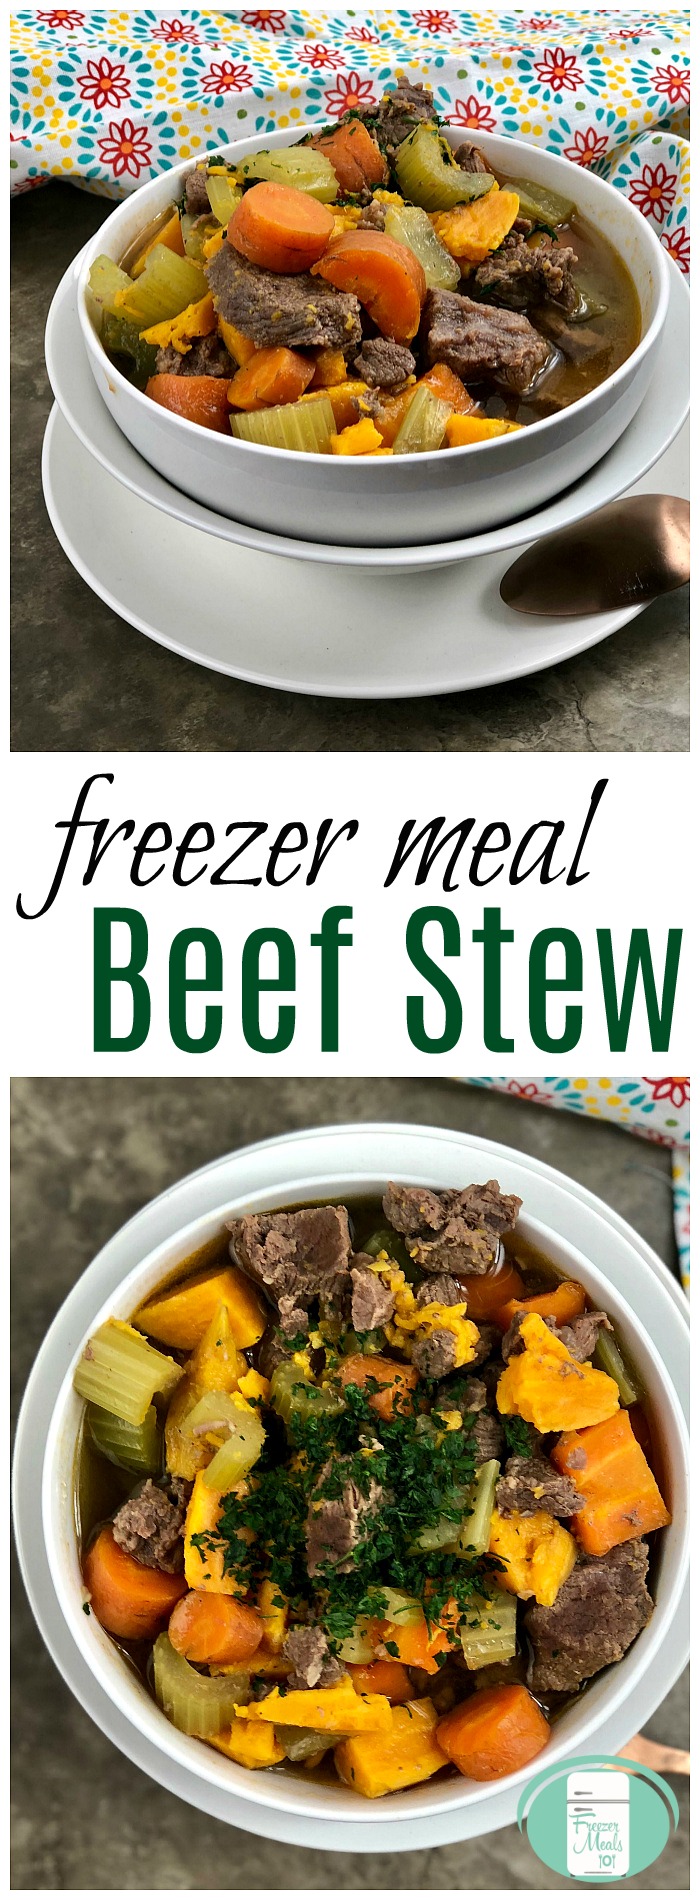 This hearty beef stew recipe can go from the freezer to the crock pot. #freezermeals101 #recipes #freezercooking #easyfamilymeals 